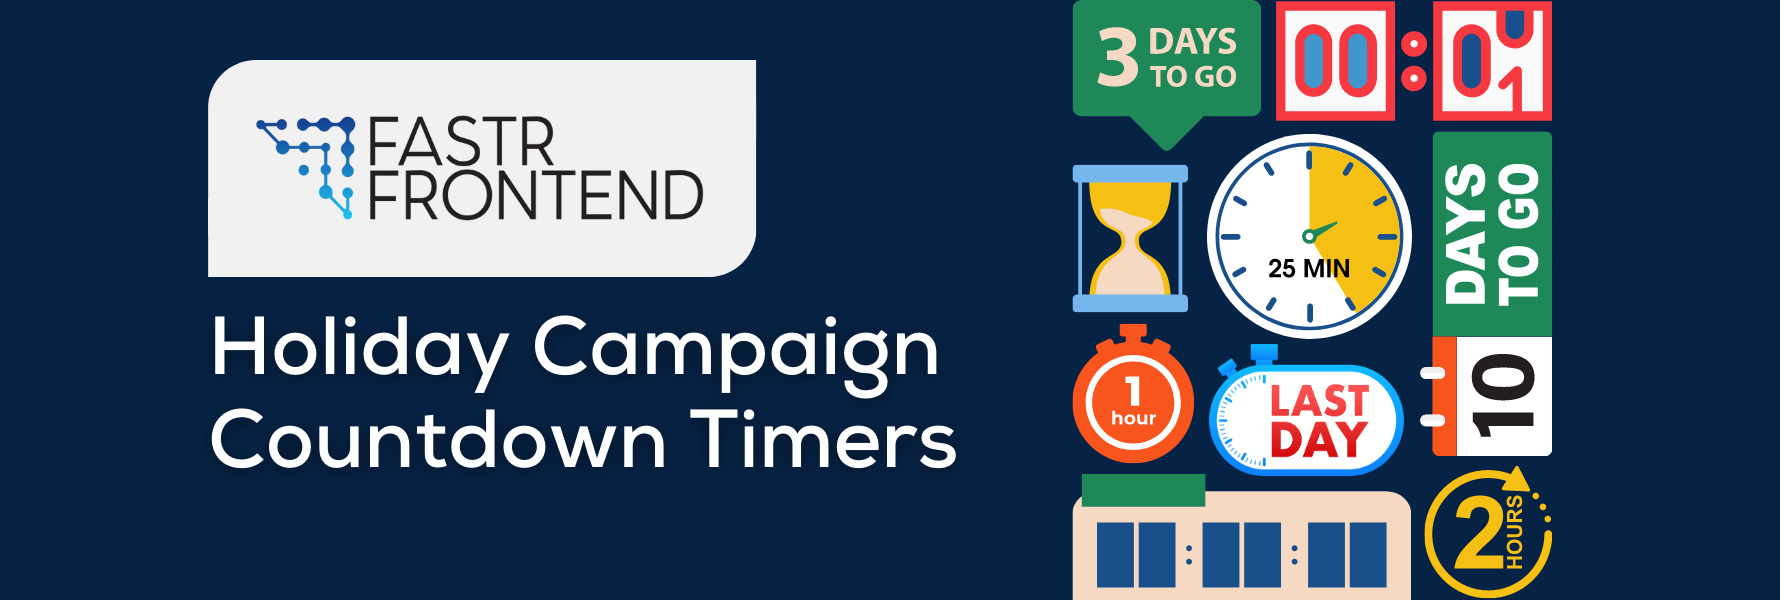 FASTR Frontend: Holiday Campaign Countdown Timers